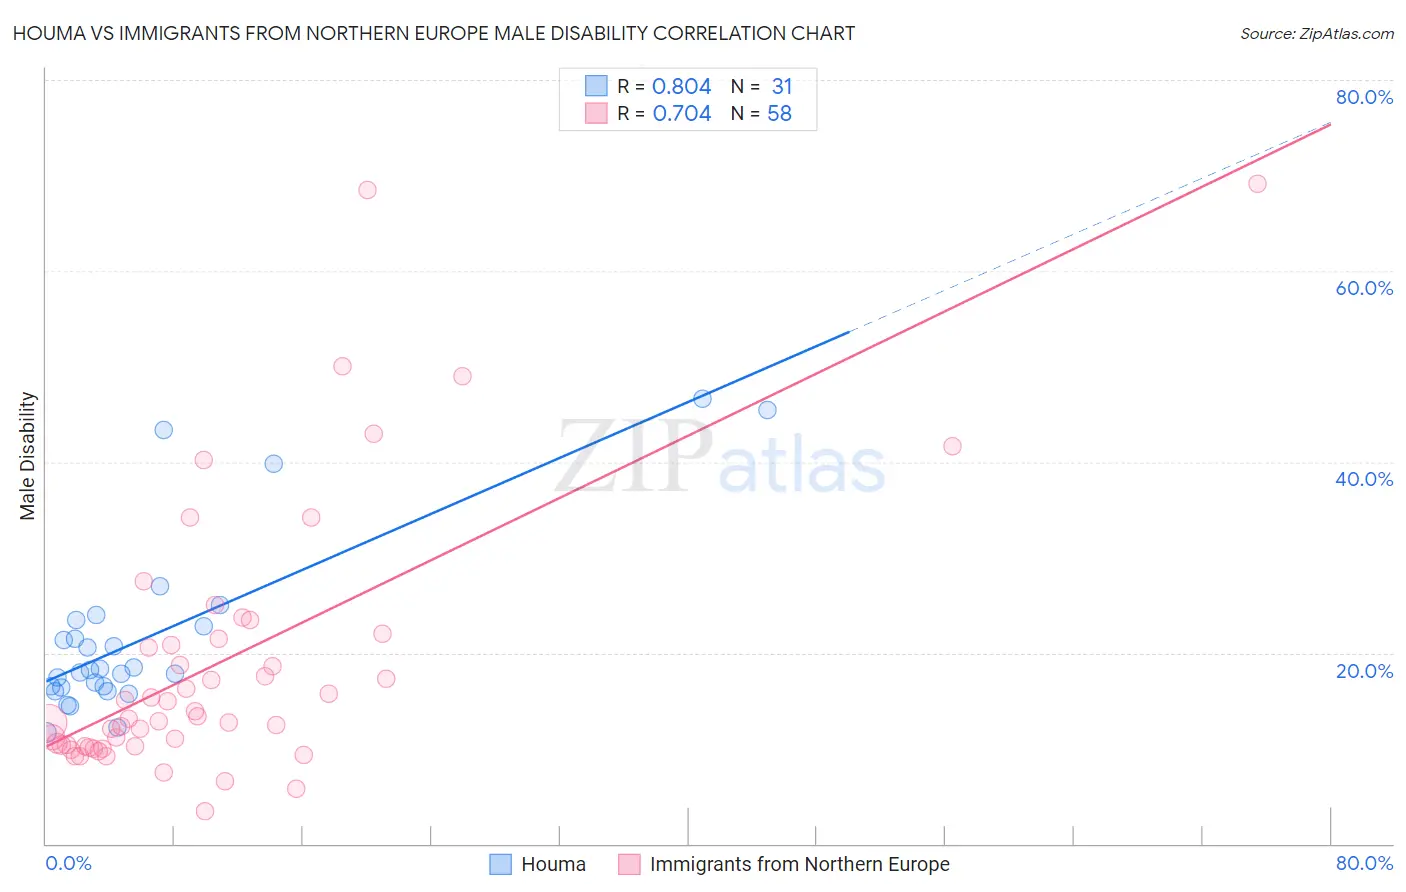 Houma vs Immigrants from Northern Europe Male Disability